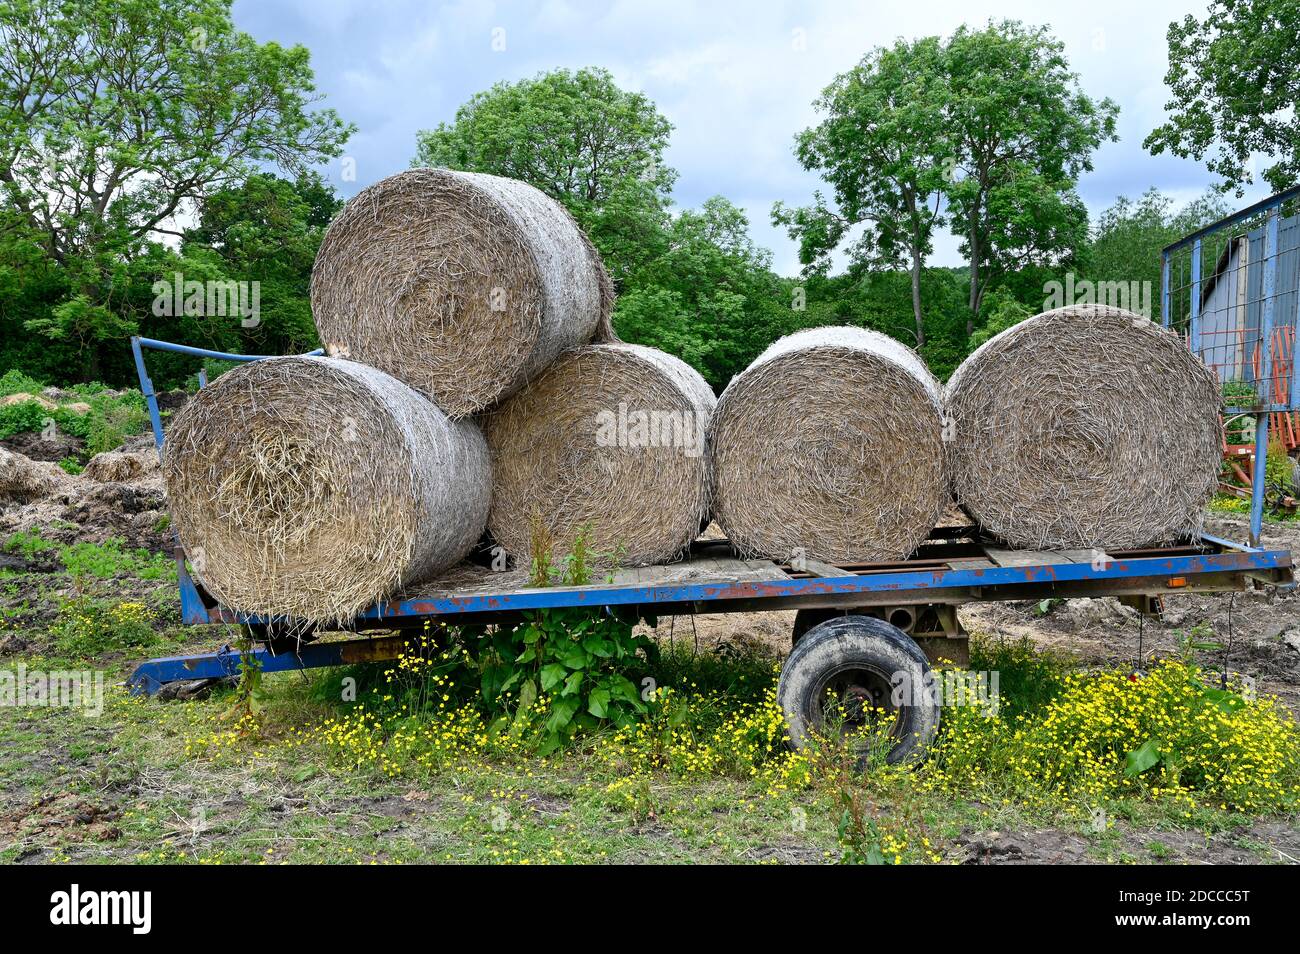 Round bales of straw stcked on a farmers trailer. Stock Photo